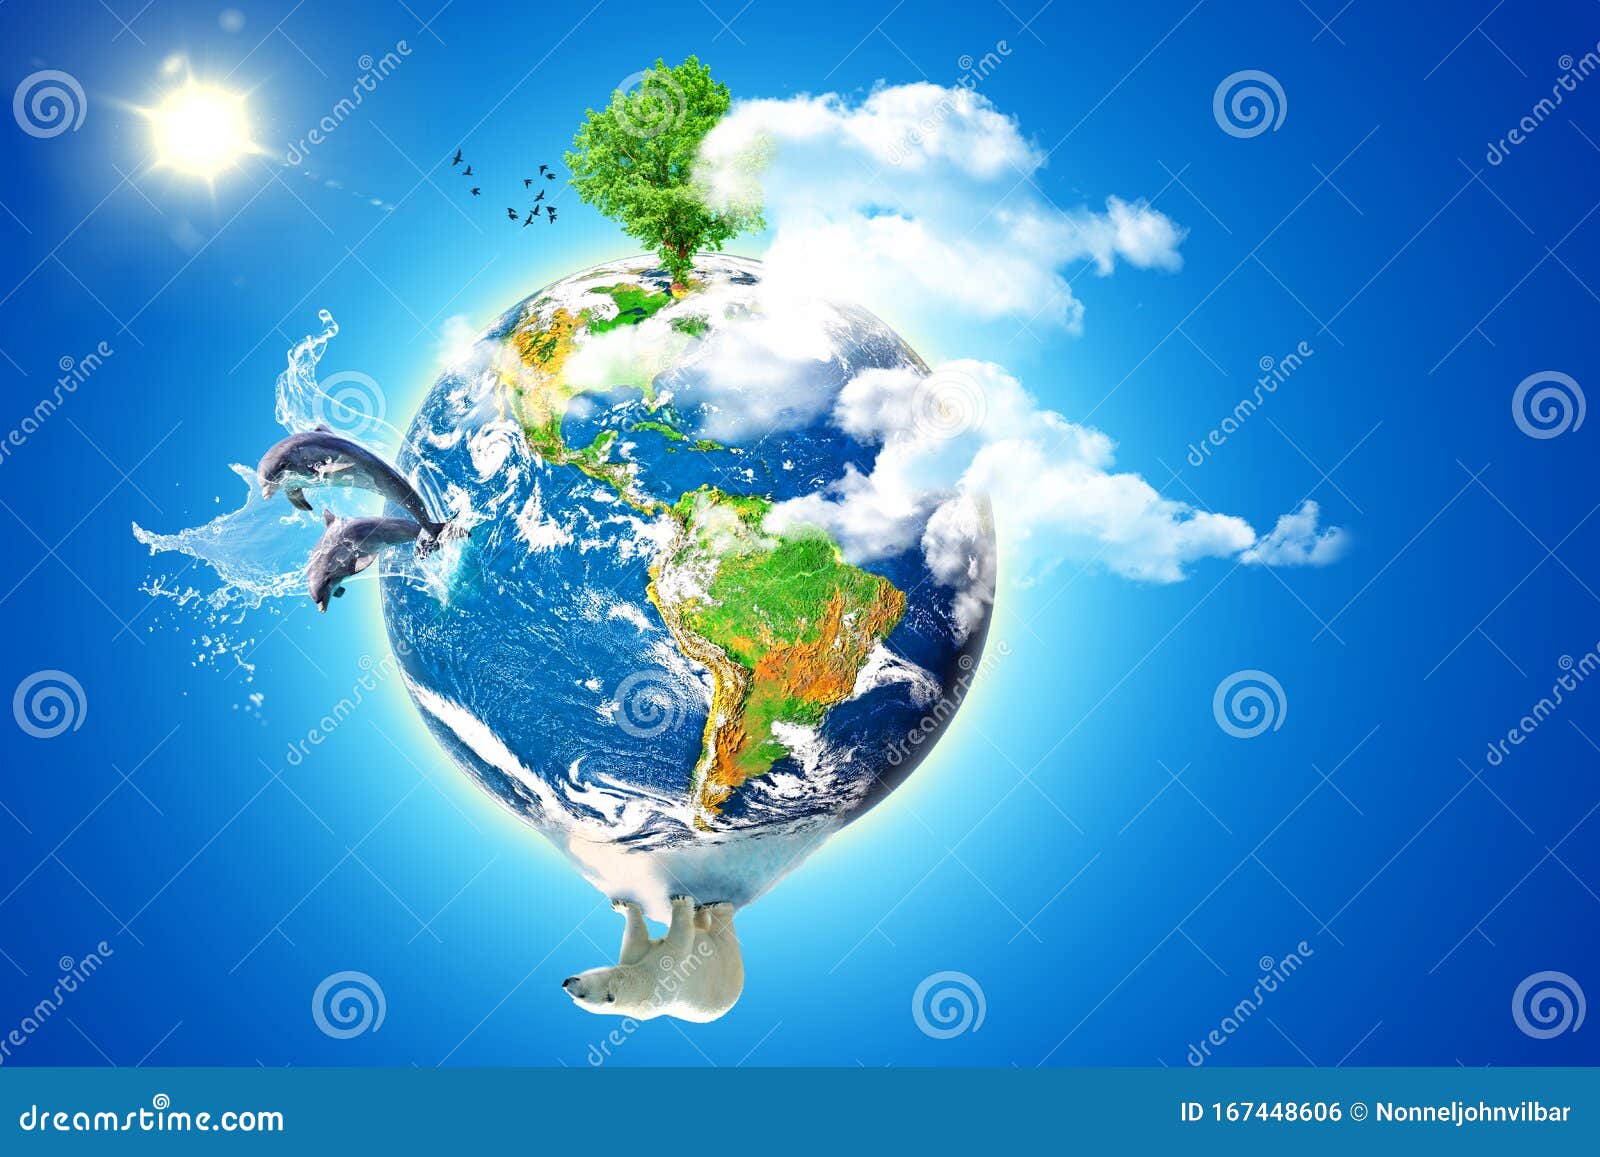 Earth with Elements of Nature and Animals Stock Photo - of conceptual, copy: 167448606